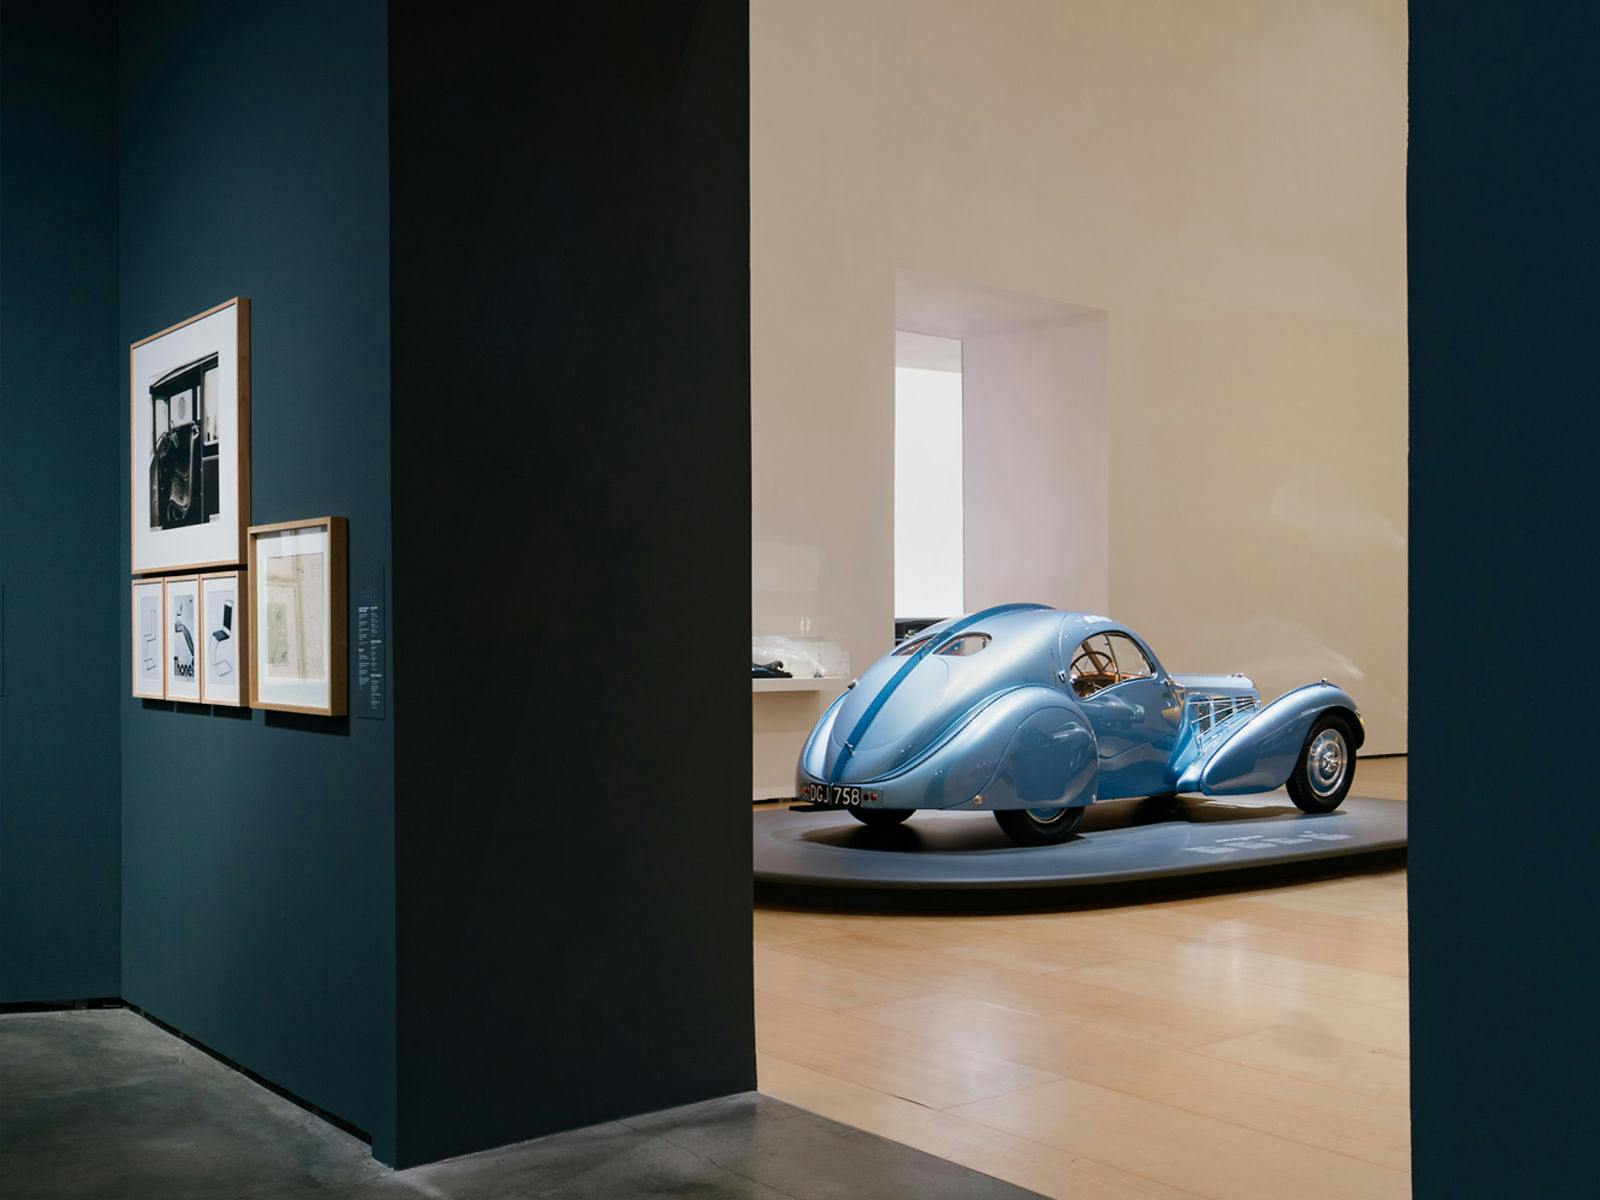 The Bugatti type 57 SC Atlantic, presented in the “Sculptures” gallery is situated next to the celebrated “Walking Panther” sculpture by Rembrandt Bugatti.